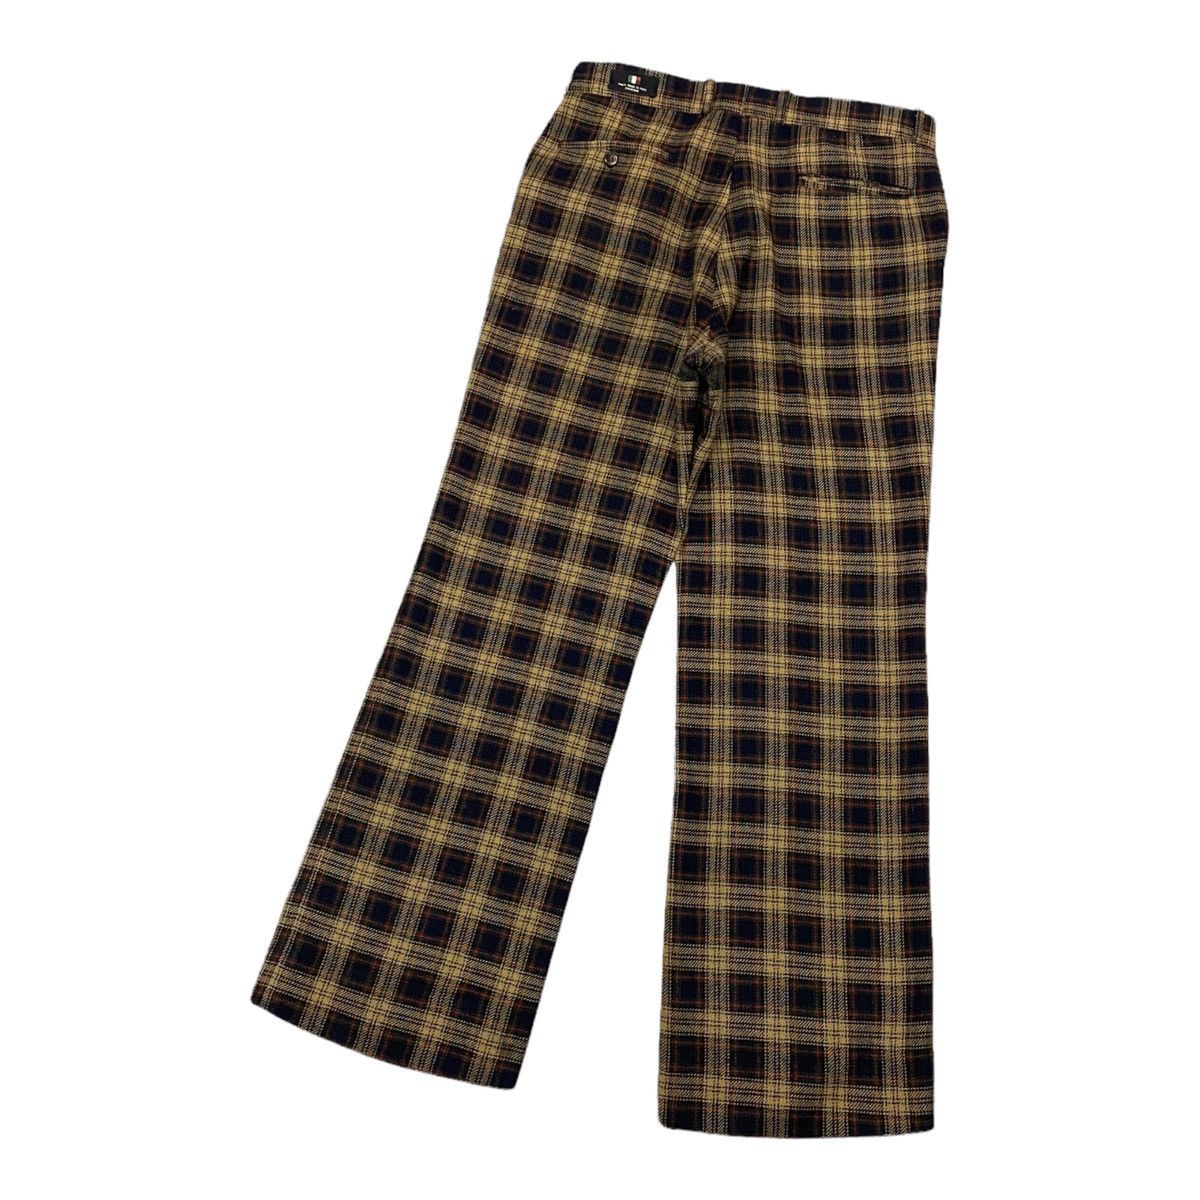 Archival Clothing - 🔥FARAH AW1998 CHECKED PLAID WOOL PANTS MADE IN ITALY - 6